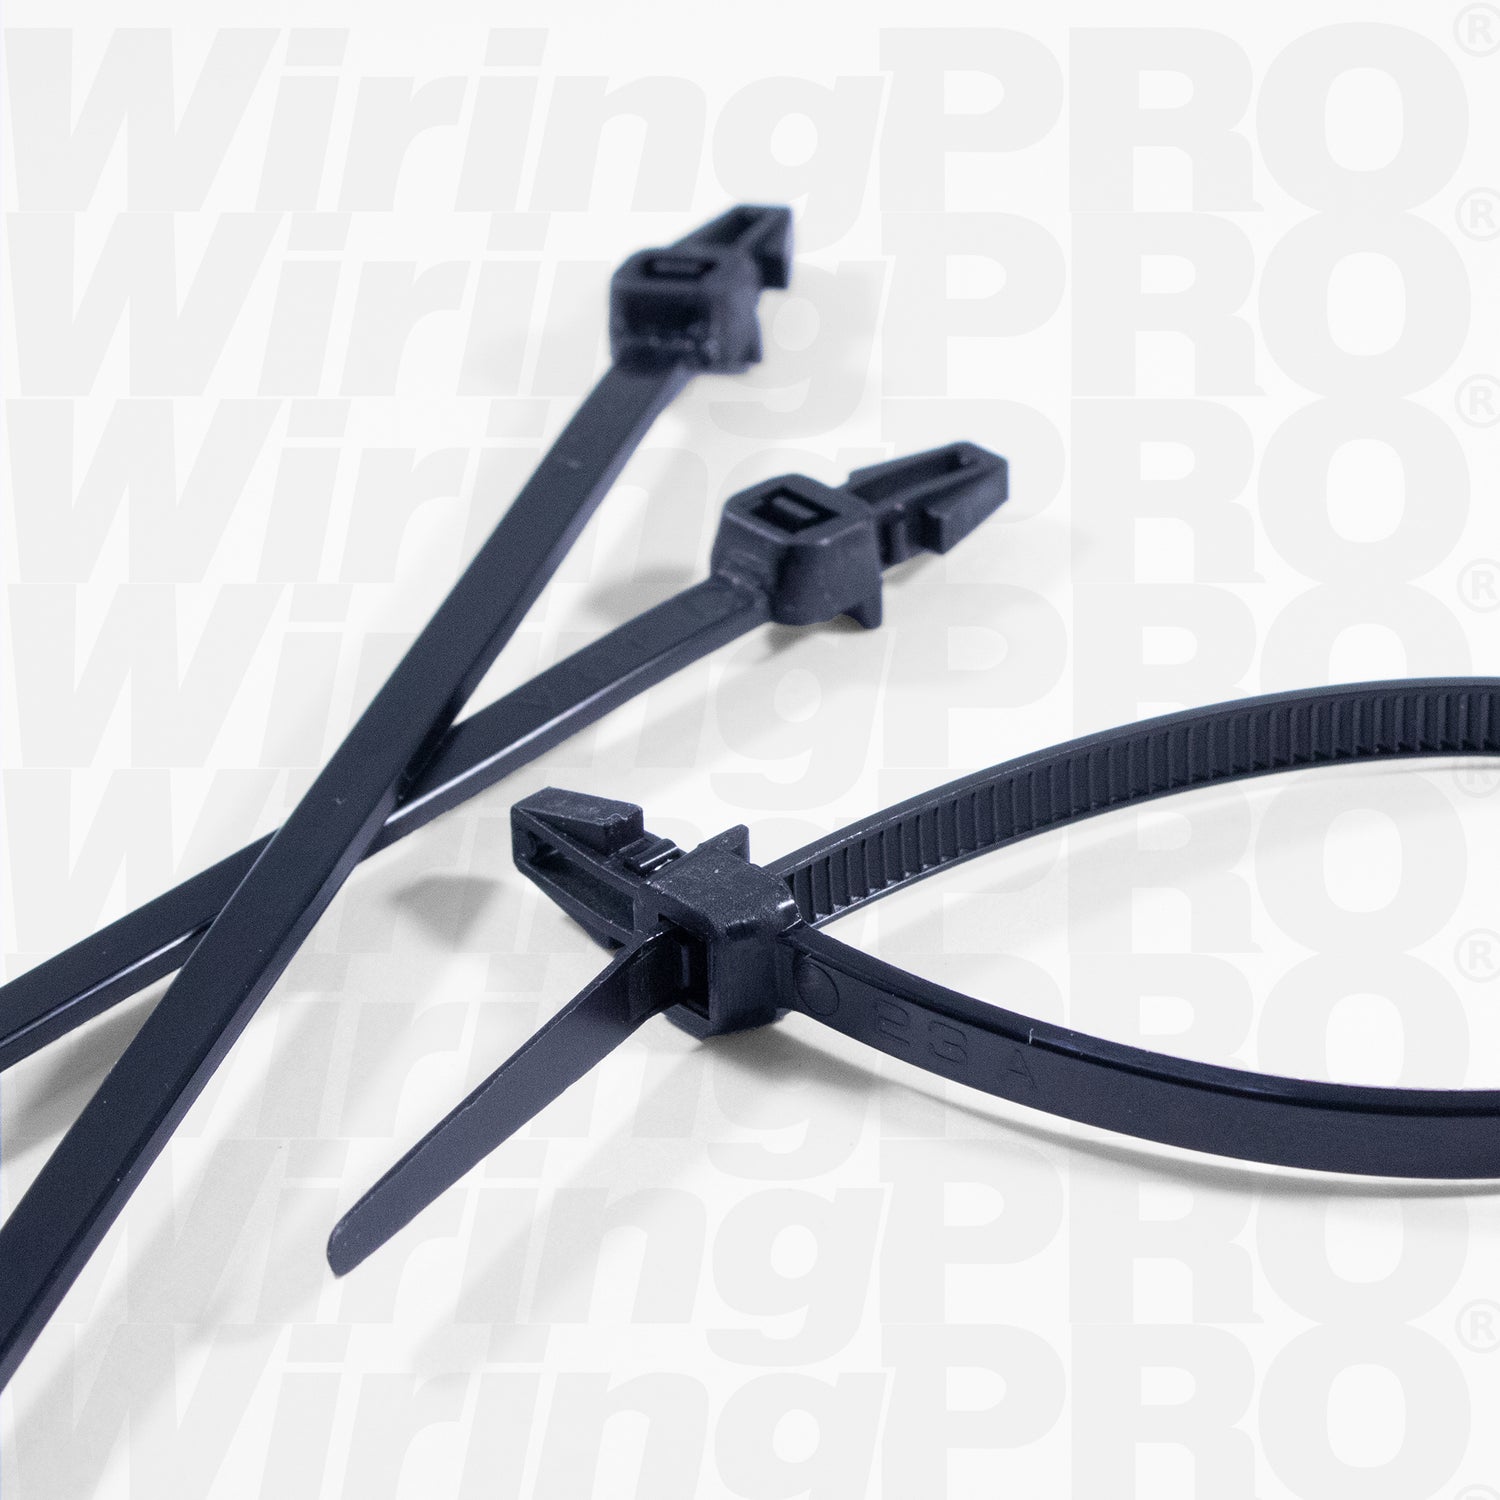 Push Mount Cable Ties